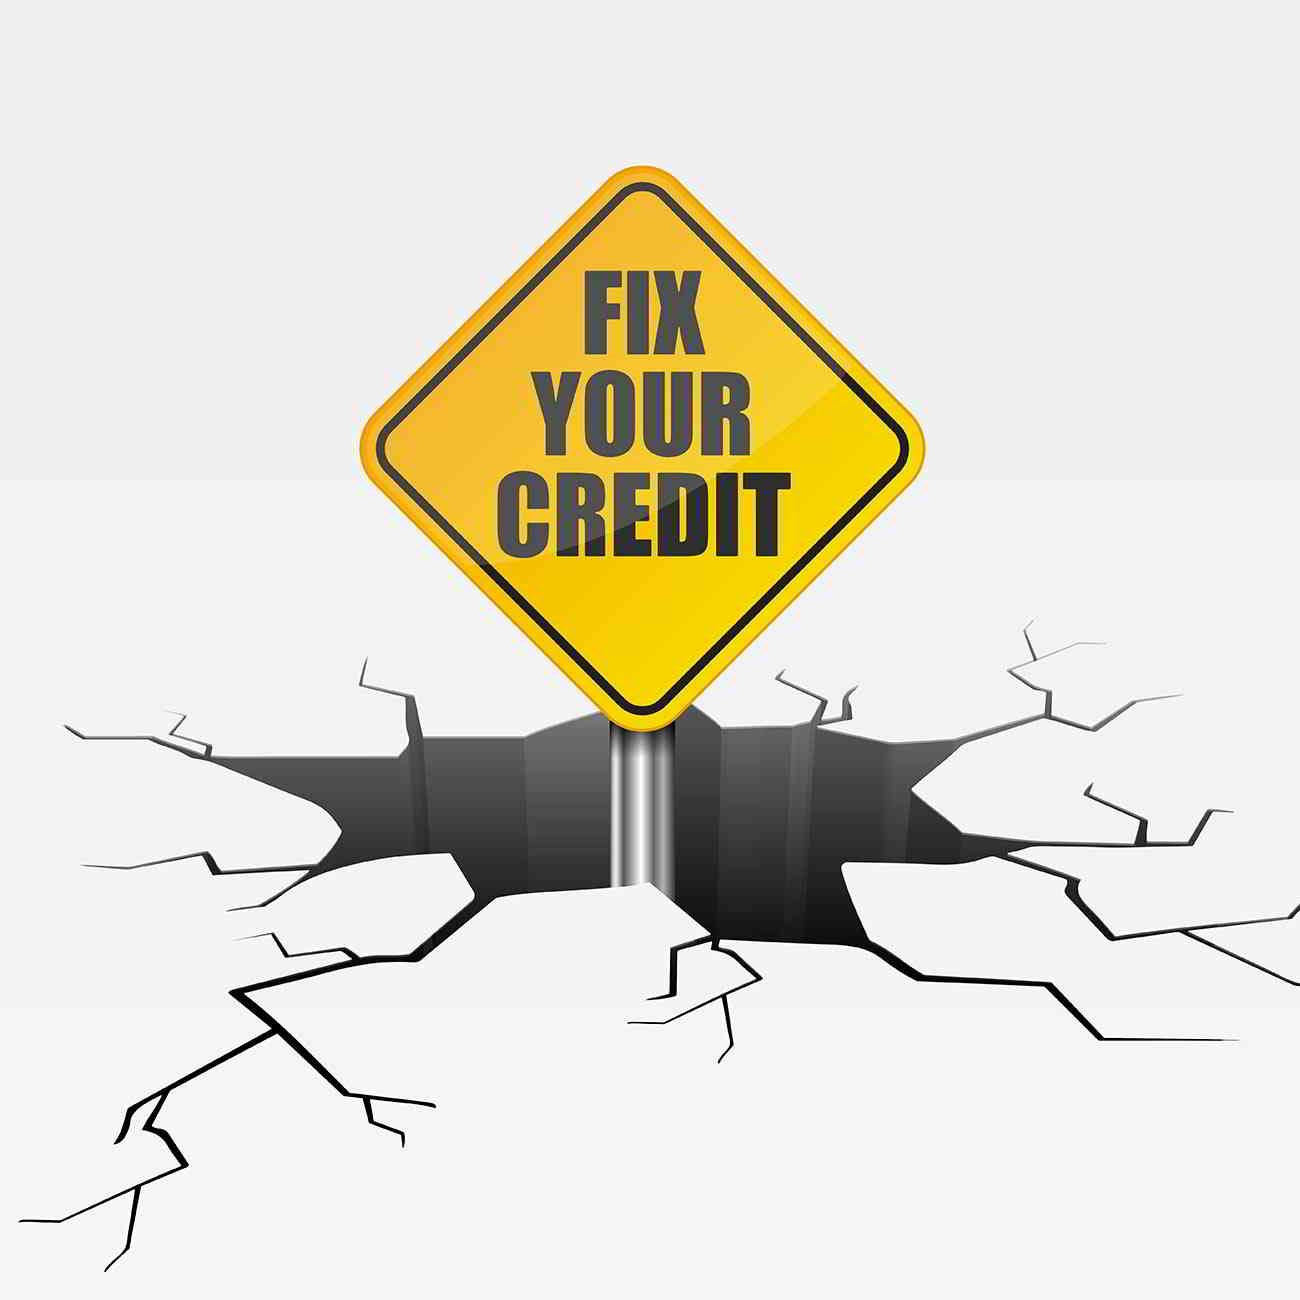 fix your credit sign